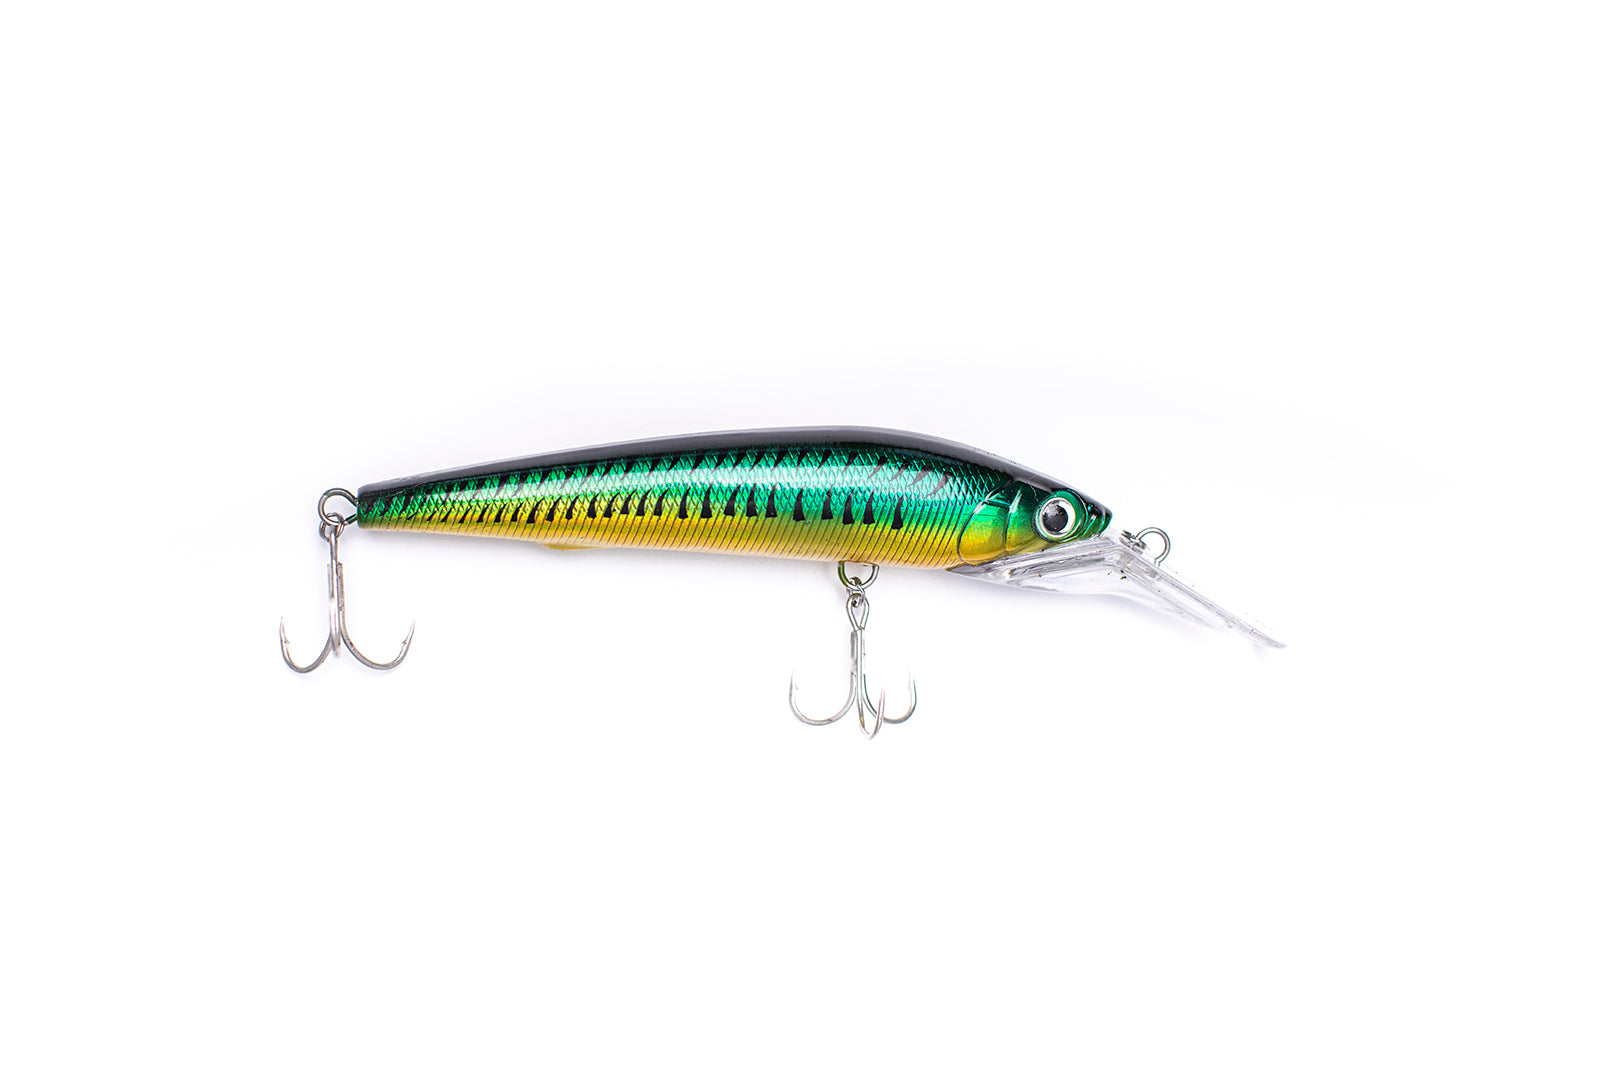 5pcs/lot Deep Diving Runner Minnow Jerkbaits Hard Plastic Fishing Lures  Bass Tourt Baits Hook Tackle for Saltwater and Freshwater 14.5cm/5.7/12.7g